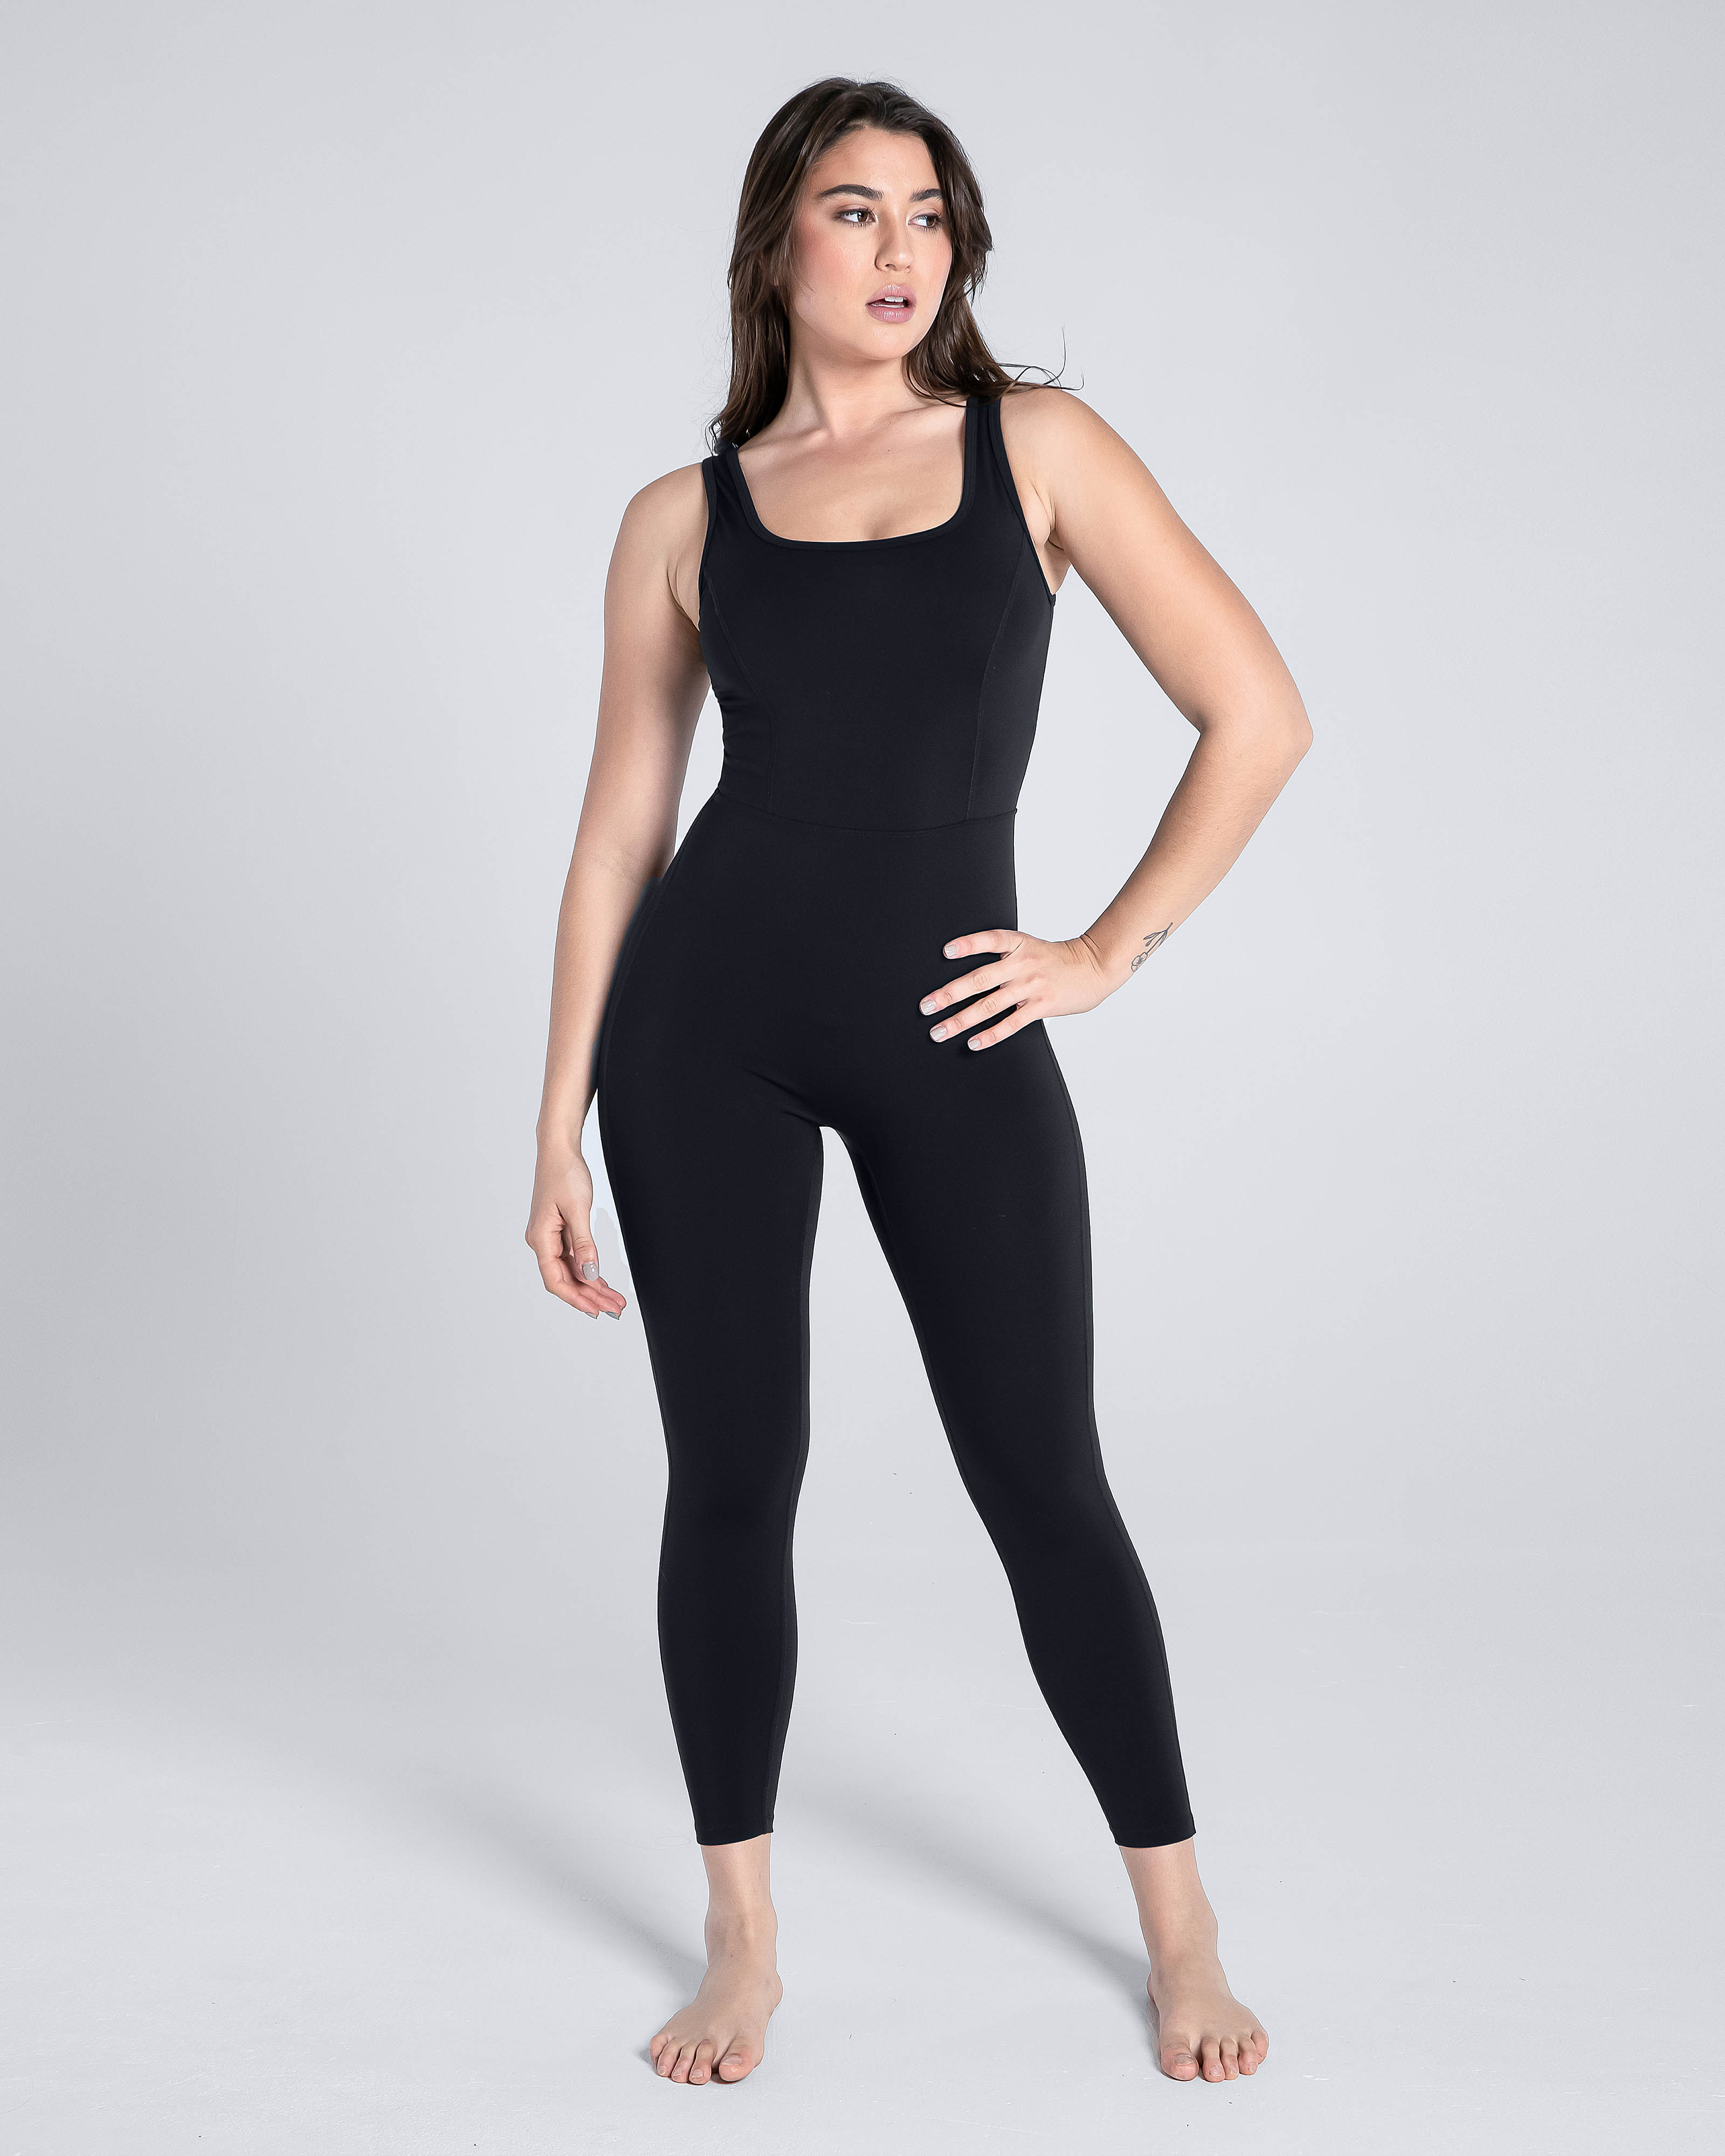 Cosmolle's Stylish Activewear: Don't Miss Out on Black Friday Sale